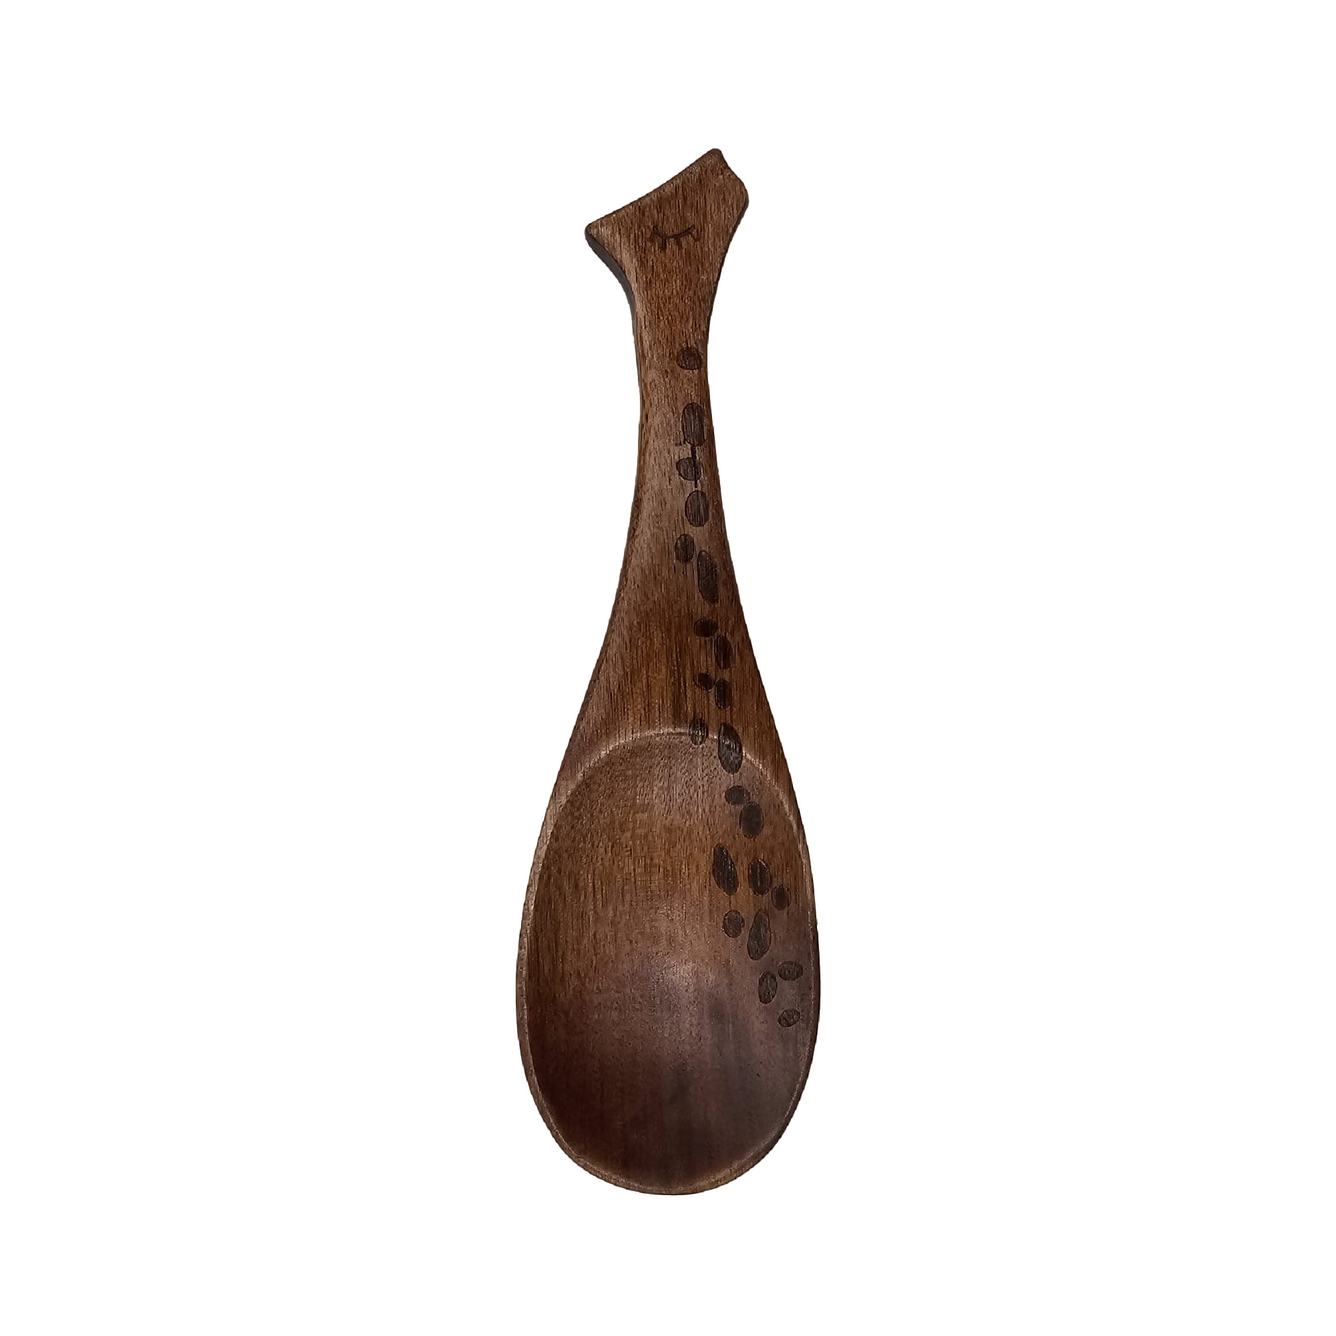 Wooden Rice Paddle